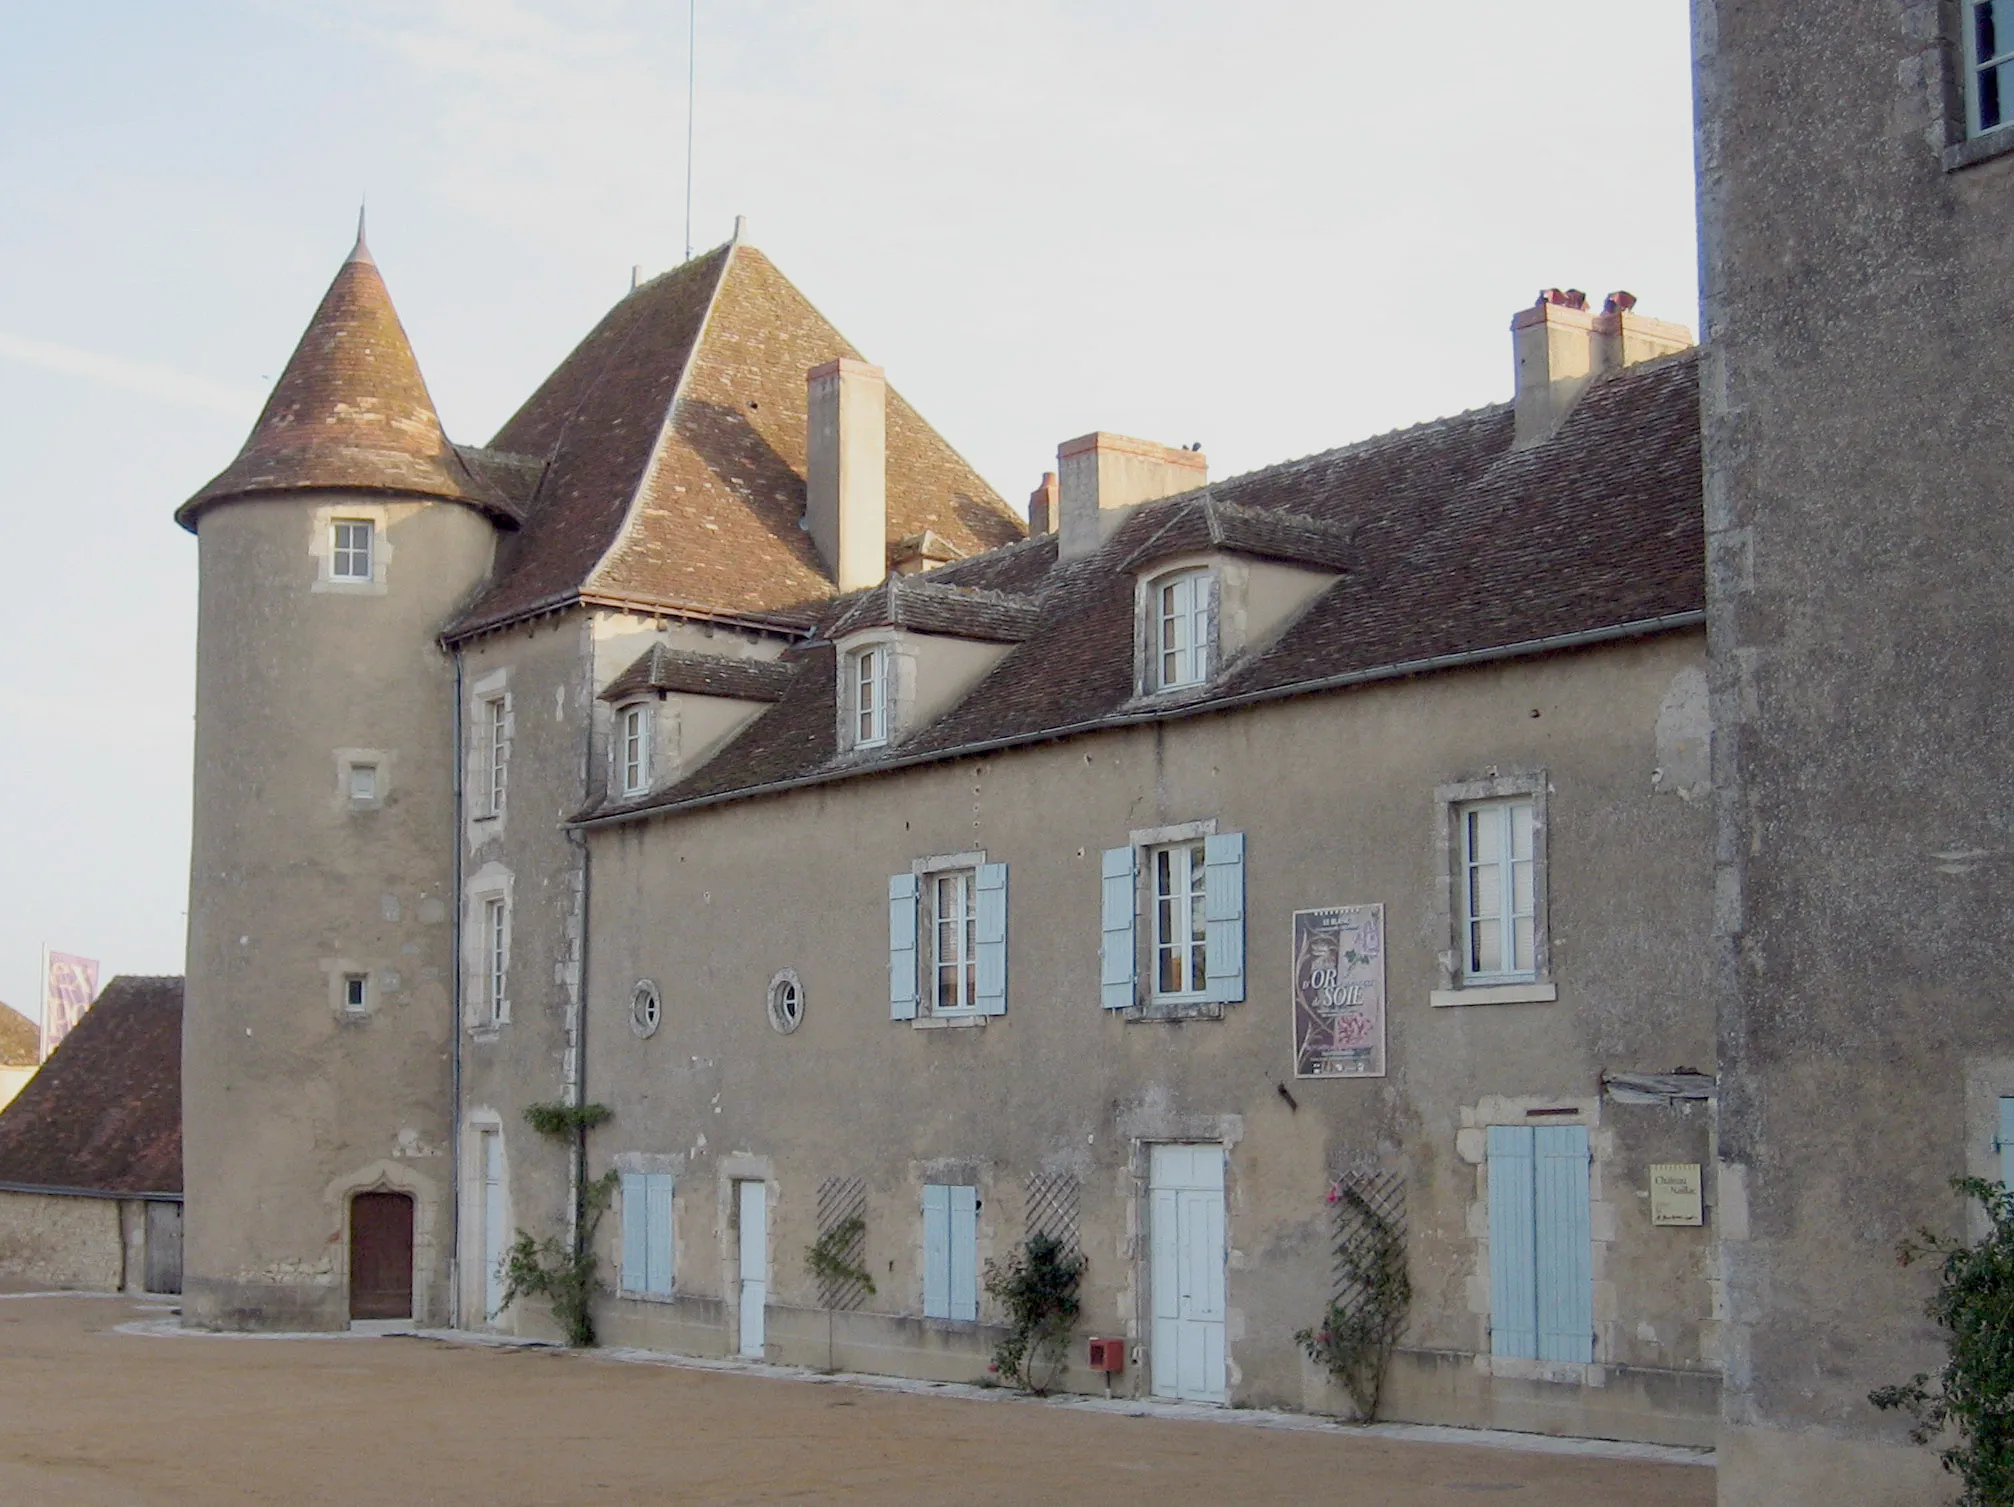 Photo showing: This is a picture taken by me of Naillac castle in Le Blanc, Indre, France. The two square dungeons are from XII-XIII century. It is now a museum.